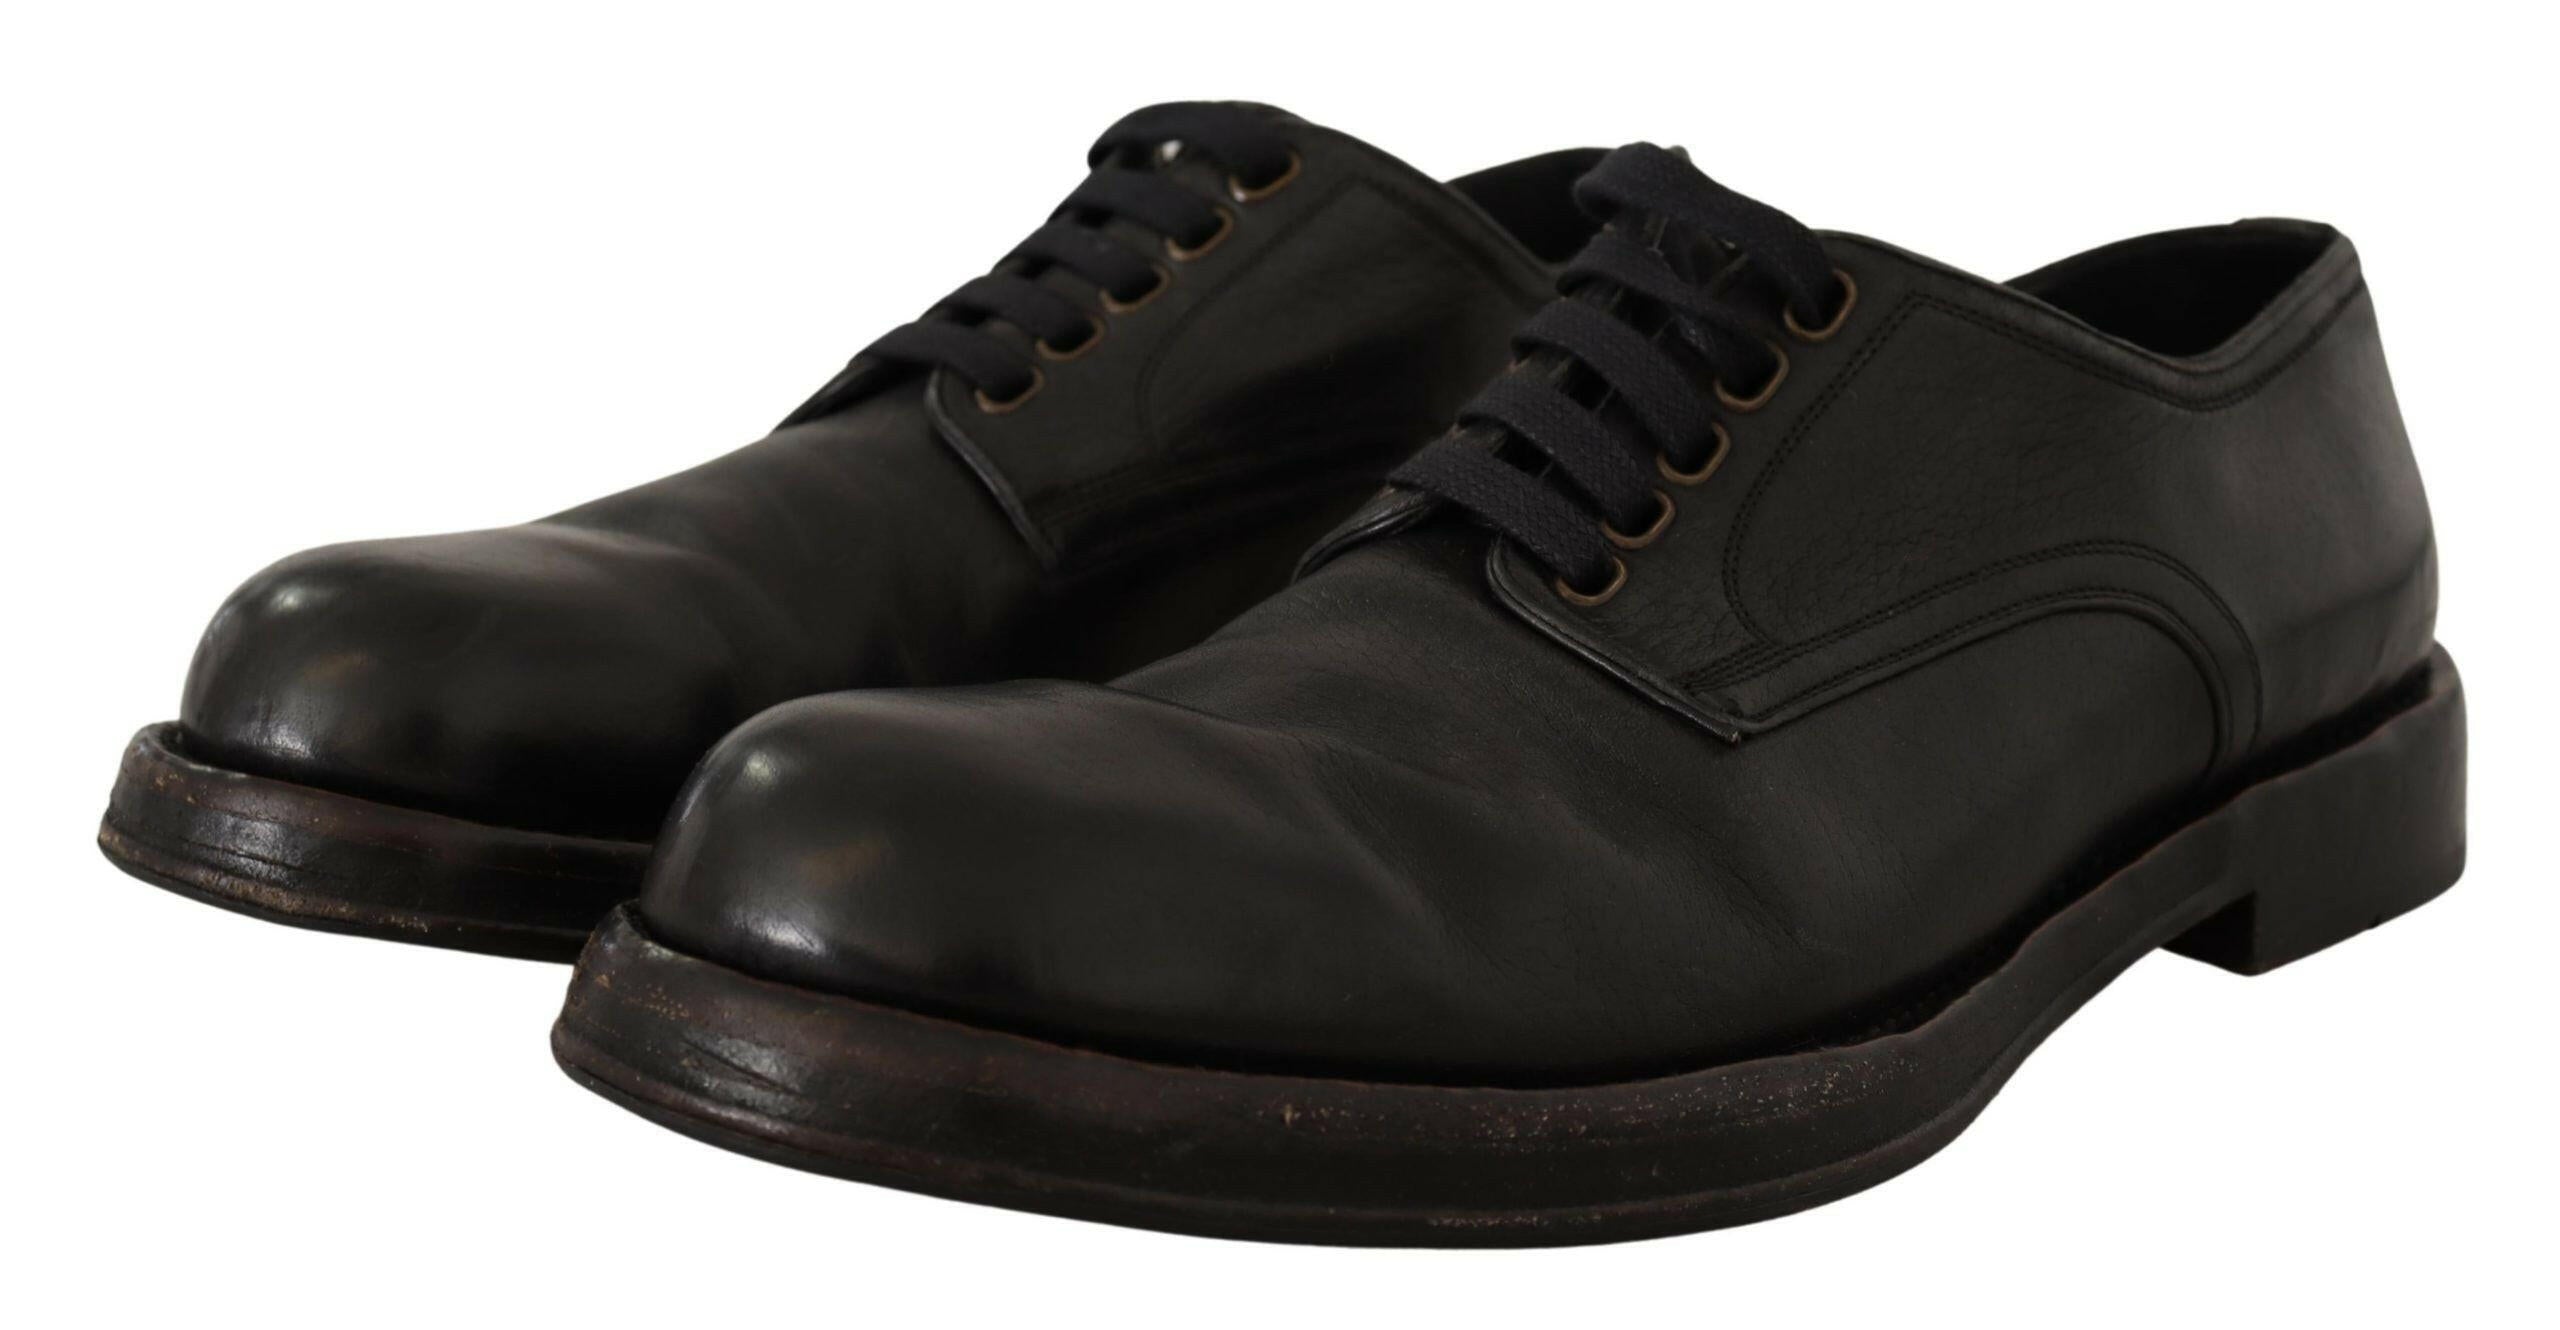 Dolce & Gabbana Black Leather Formal Lace Up Shoes - GENUINE AUTHENTIC BRAND LLC  